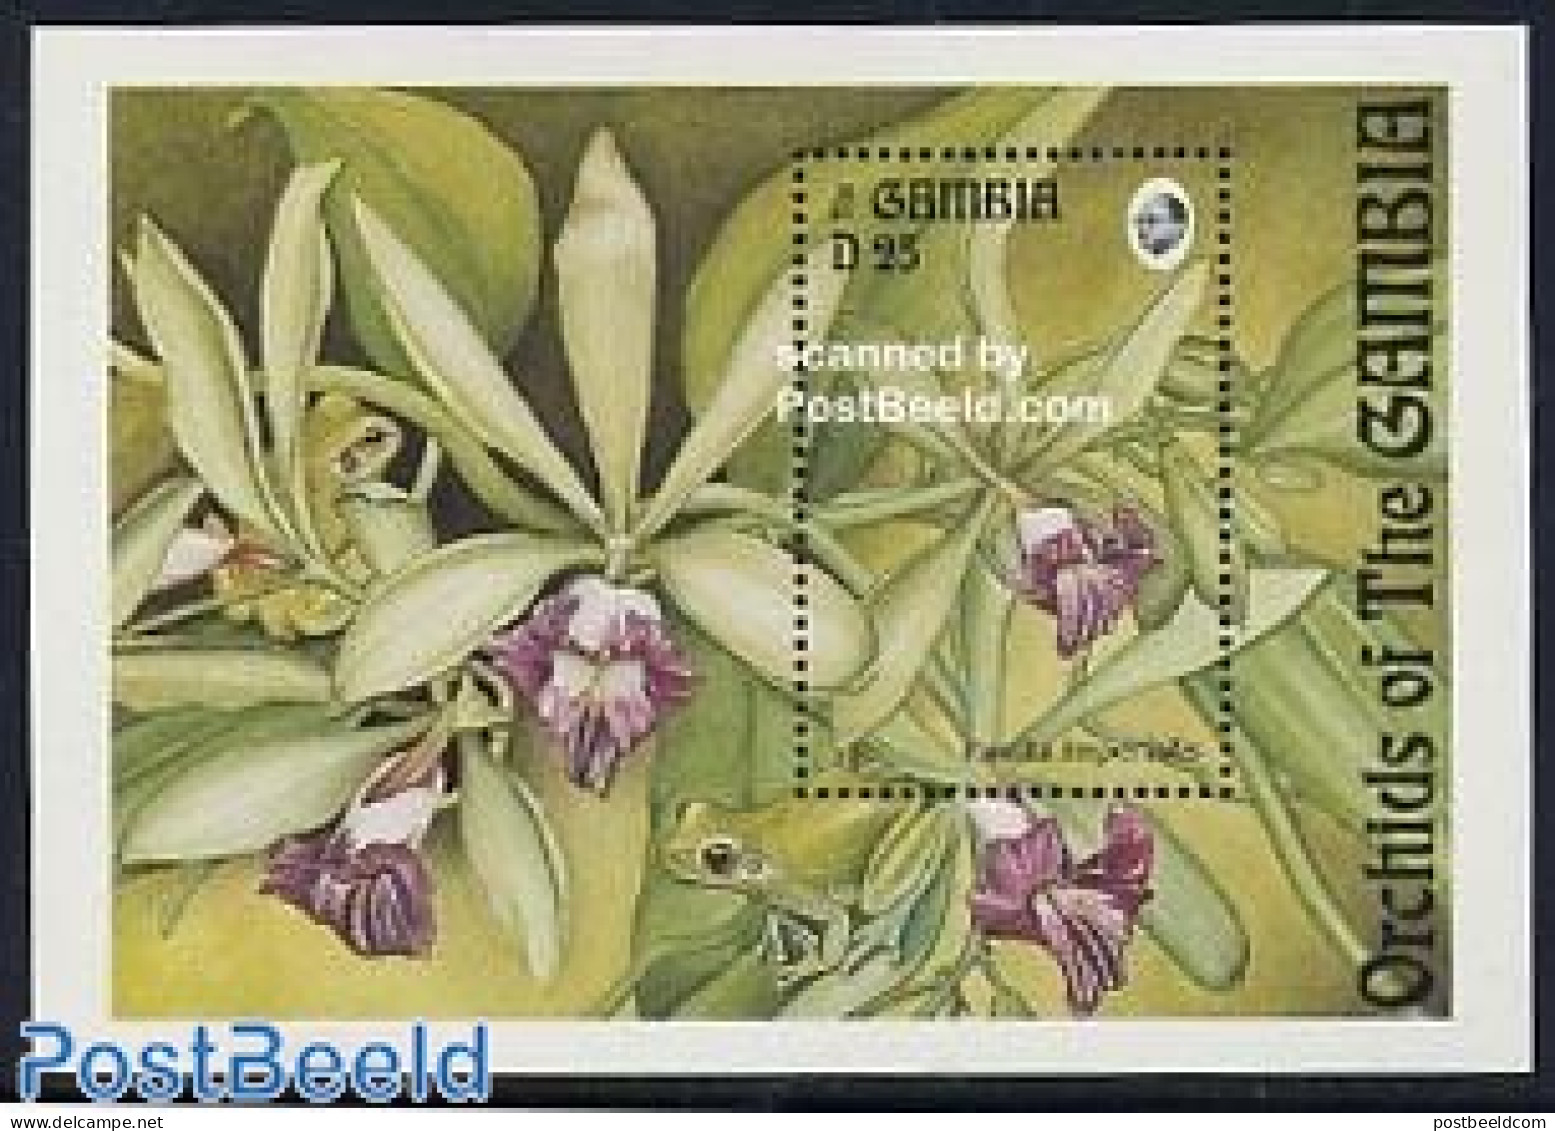 Gambia 1994 Orchids S/s, Vanilla Imperialis, Mint NH, Nature - Flowers & Plants - Gambie (...-1964)